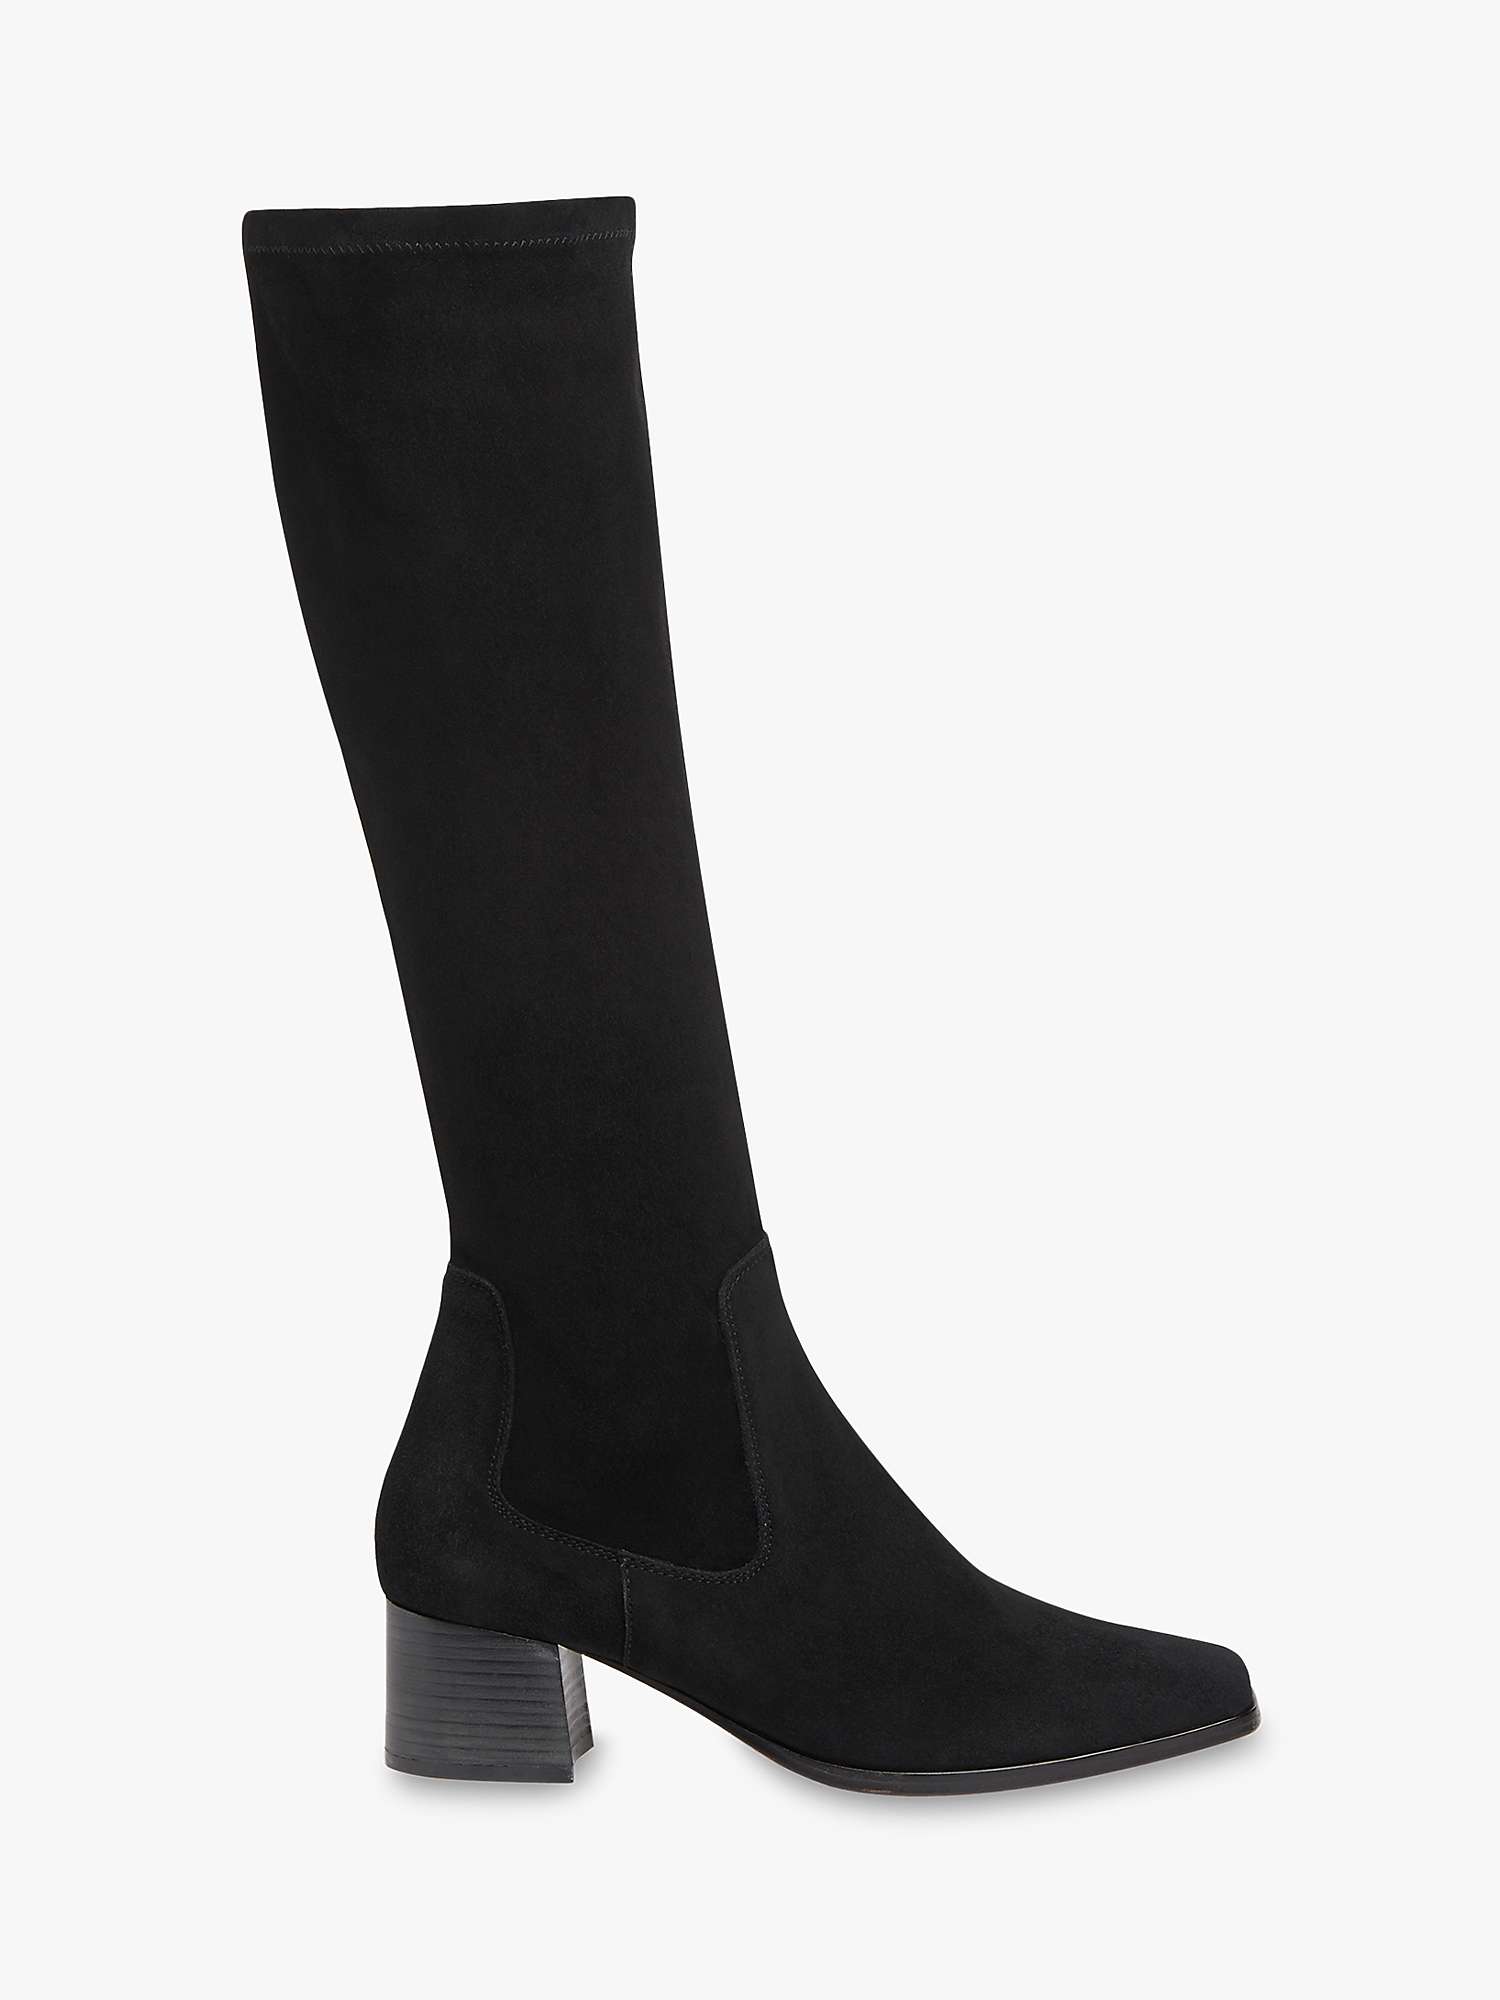 Buy Whistles Blaire Stretch Knee High Suede Boots, Black Online at johnlewis.com